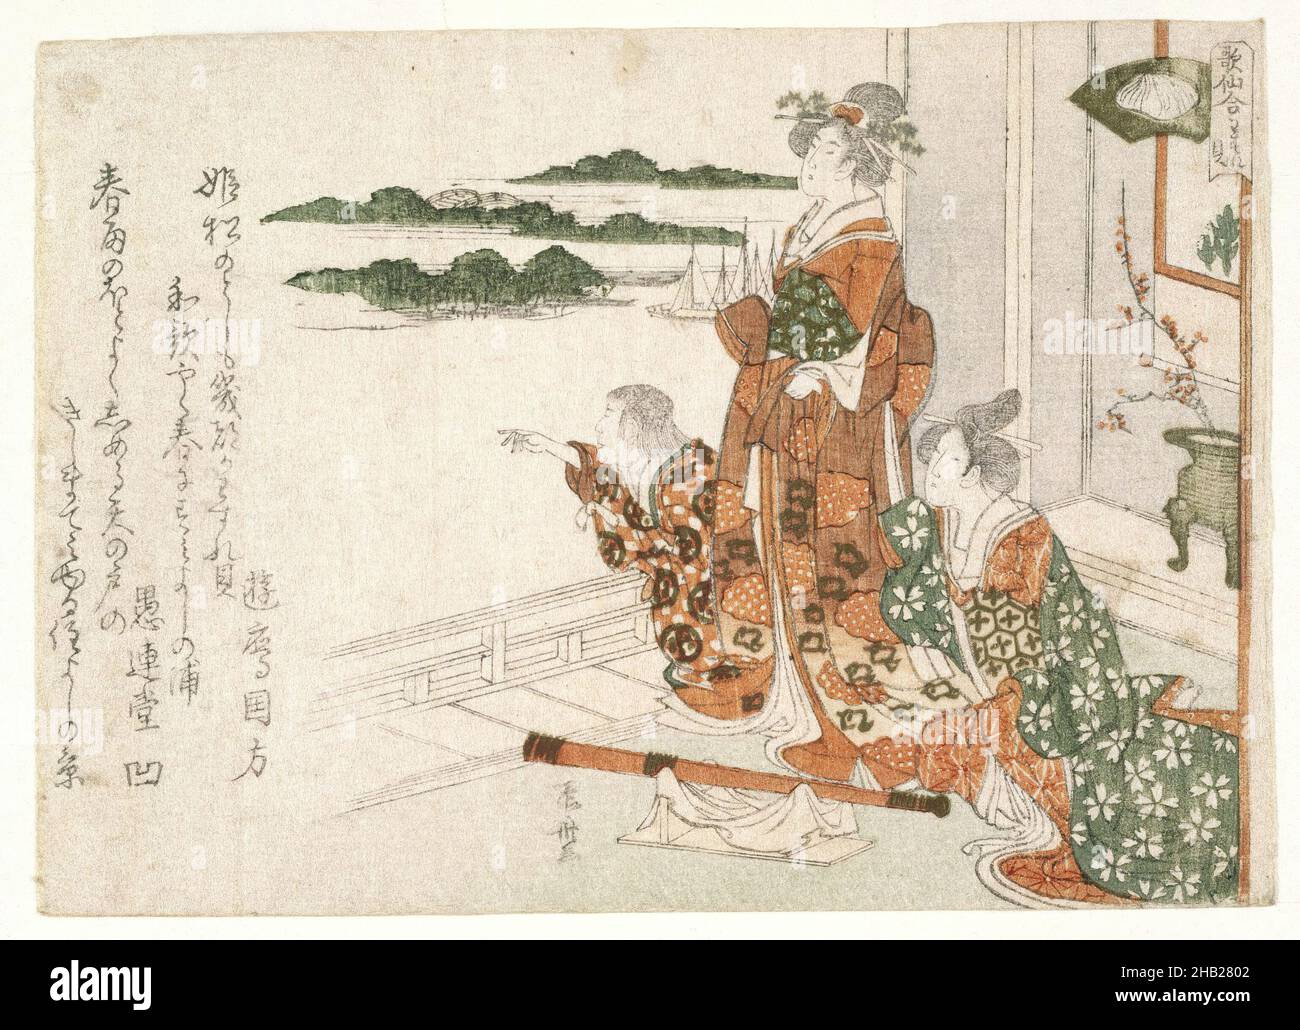 Beauties Looking at the Sea in Early Spring, from Contest of the Immortals of Poetry, Kasen awase, Ryuryuko Shinsai, Japanese, 1764-1820, Woodblock print, Japan, ca. 1809, Edo Period, 5 1/4 x 7 3/8 in., 13.5 x 18.8 cm, bay, kimono, ladies, Leisure, ships, telescope, window Stock Photo